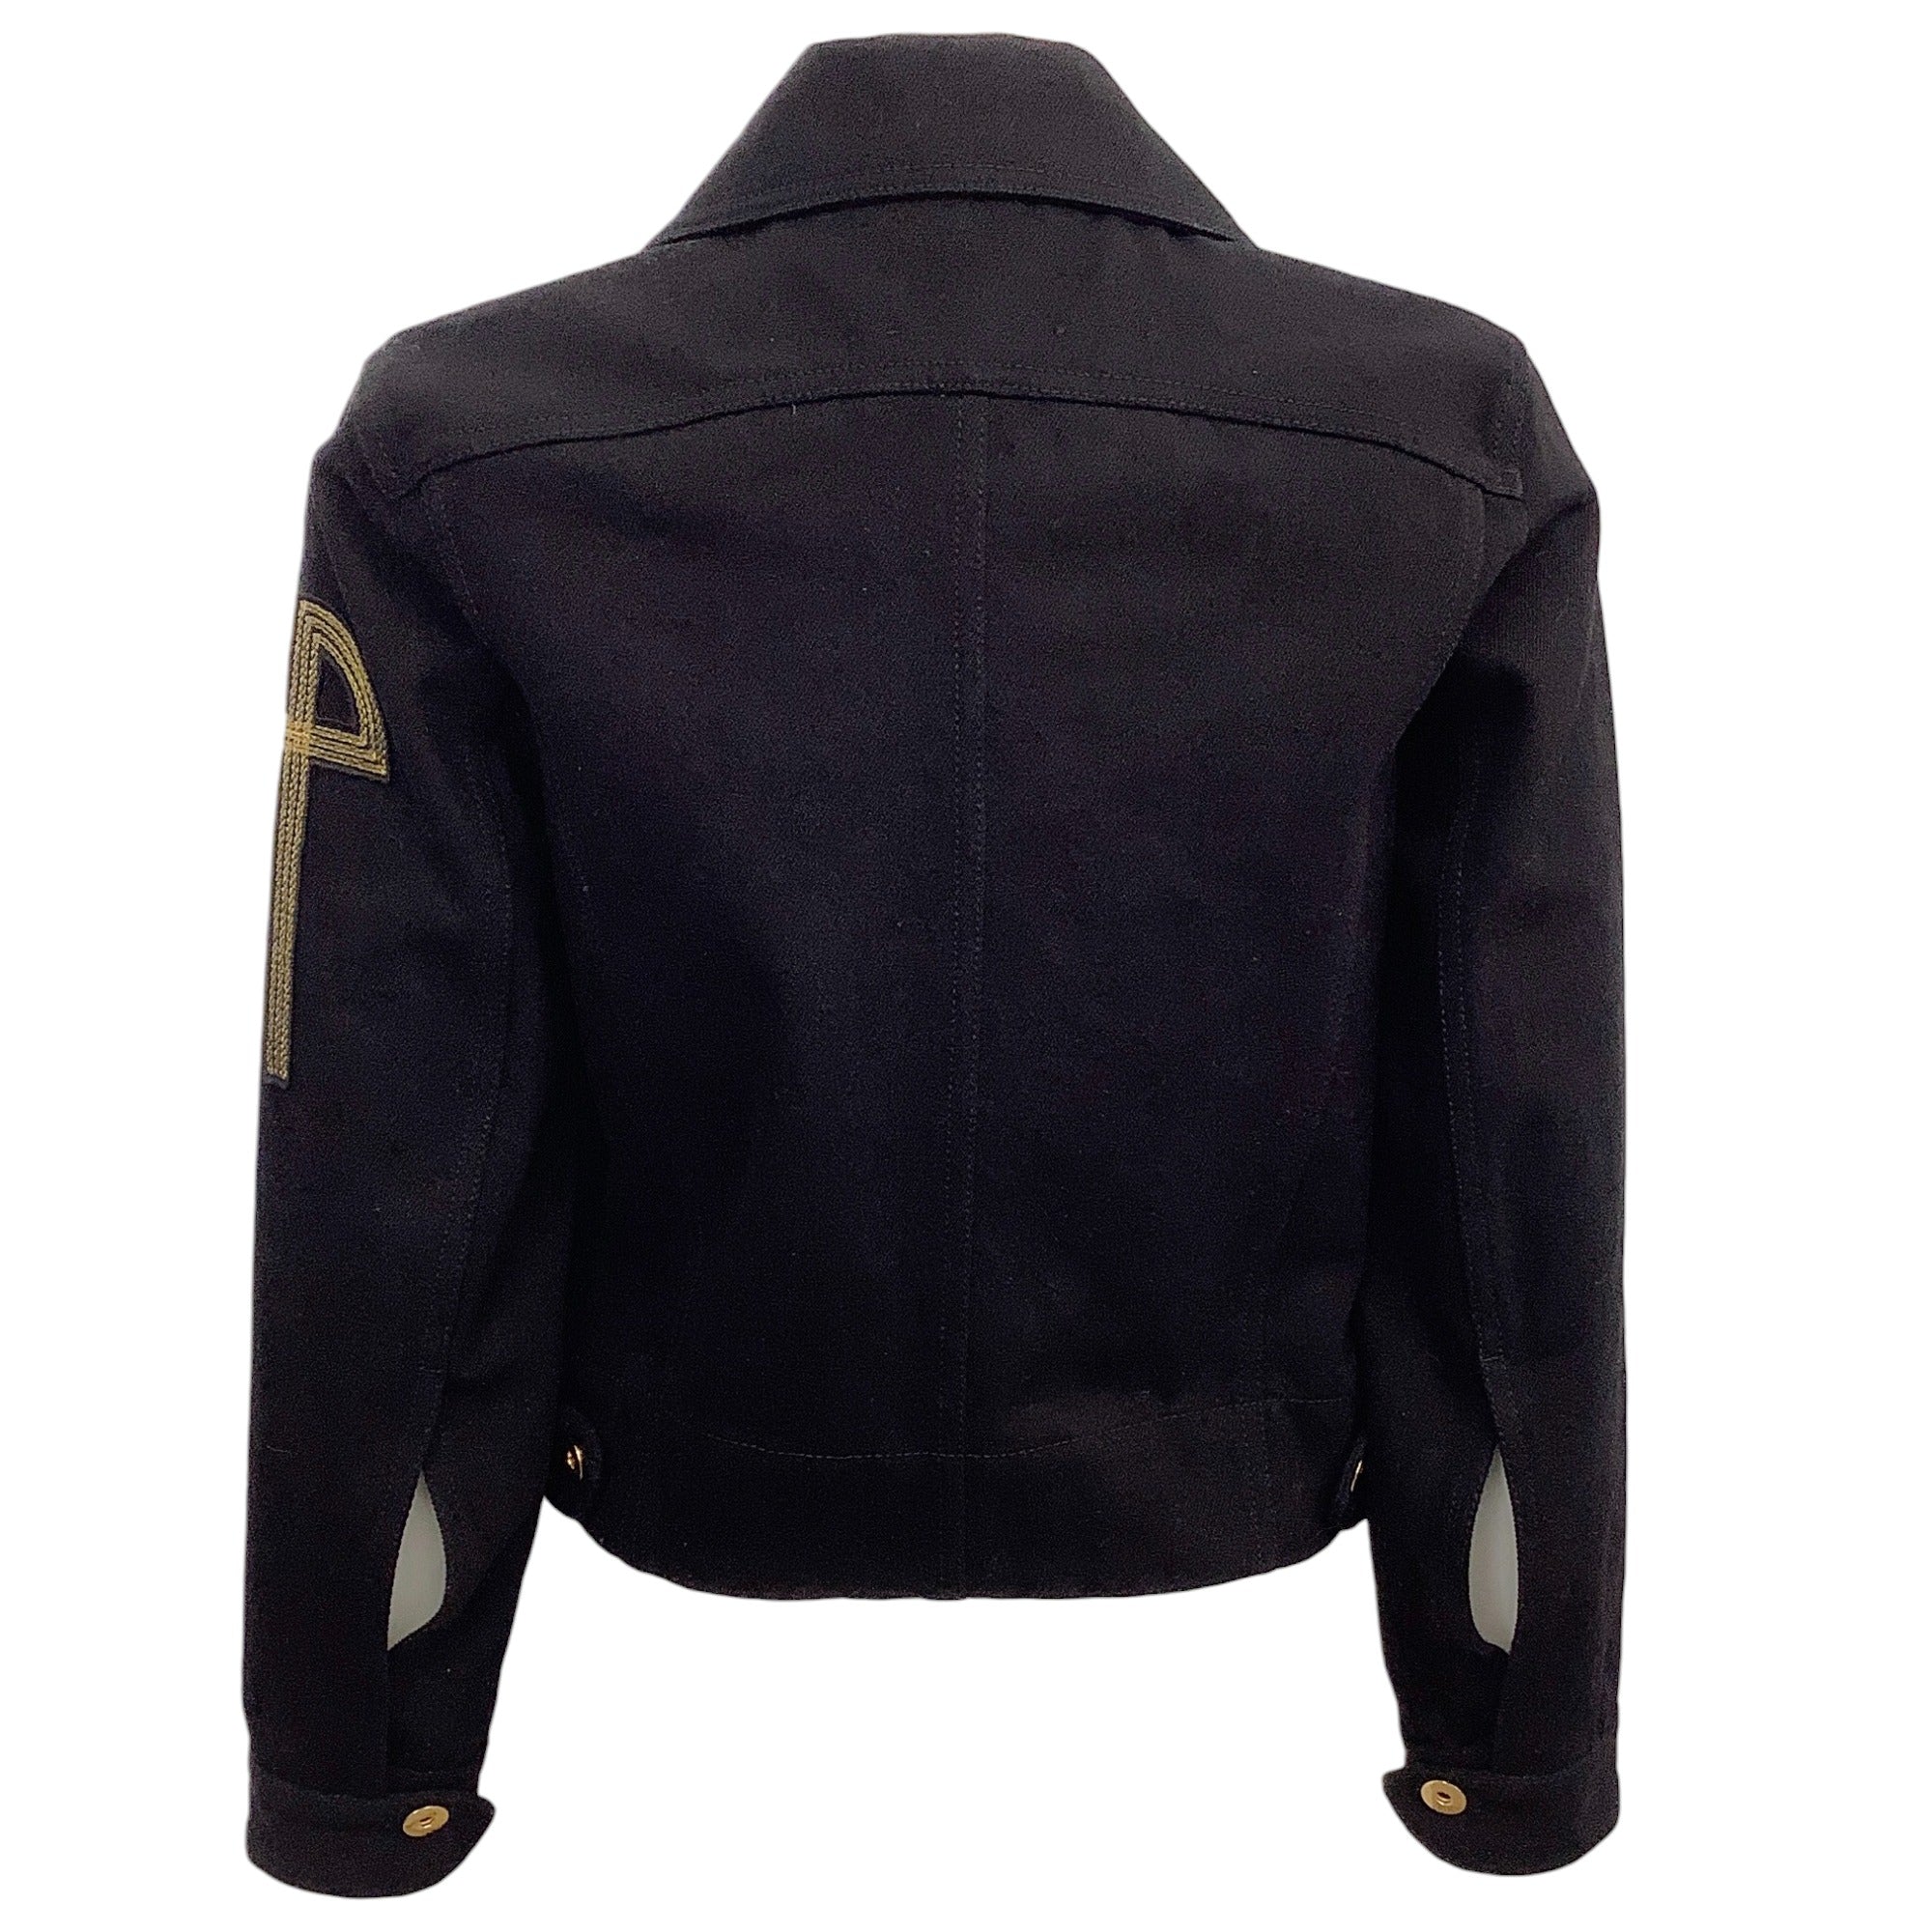 Patou Black Denim Jacket with Gold Embroidery